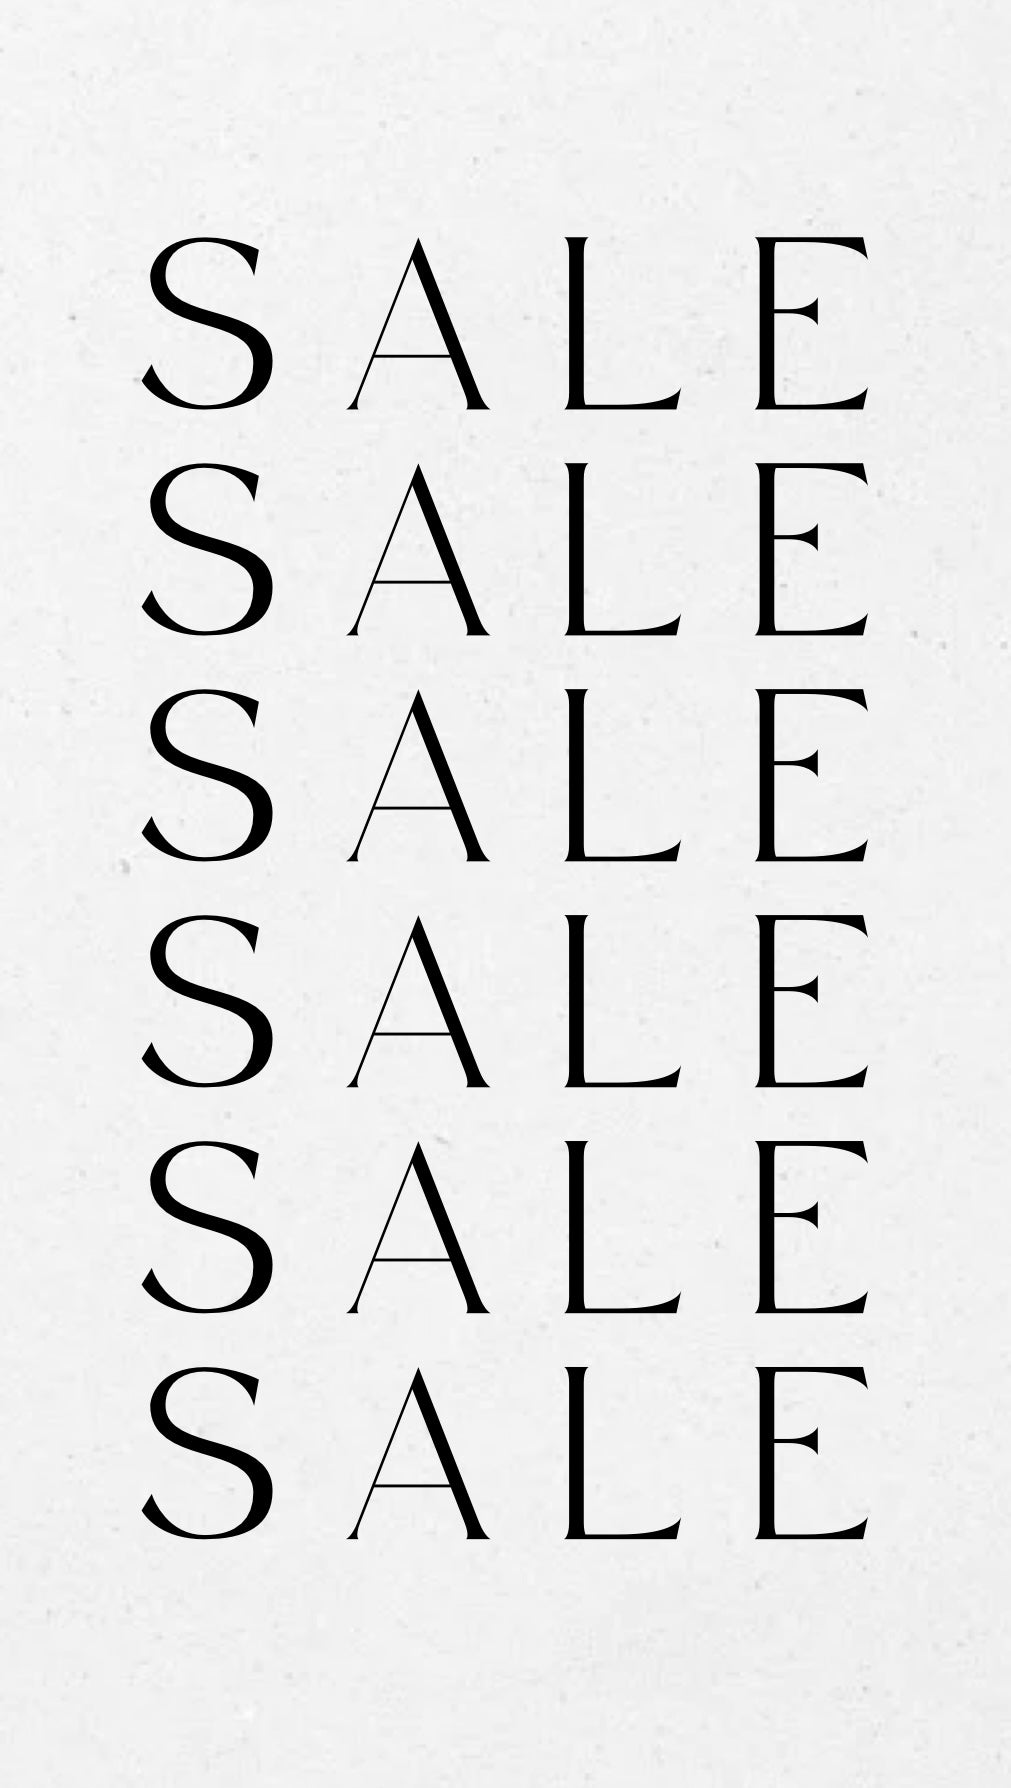 The sale has arrived! | Beatrice Bayliss